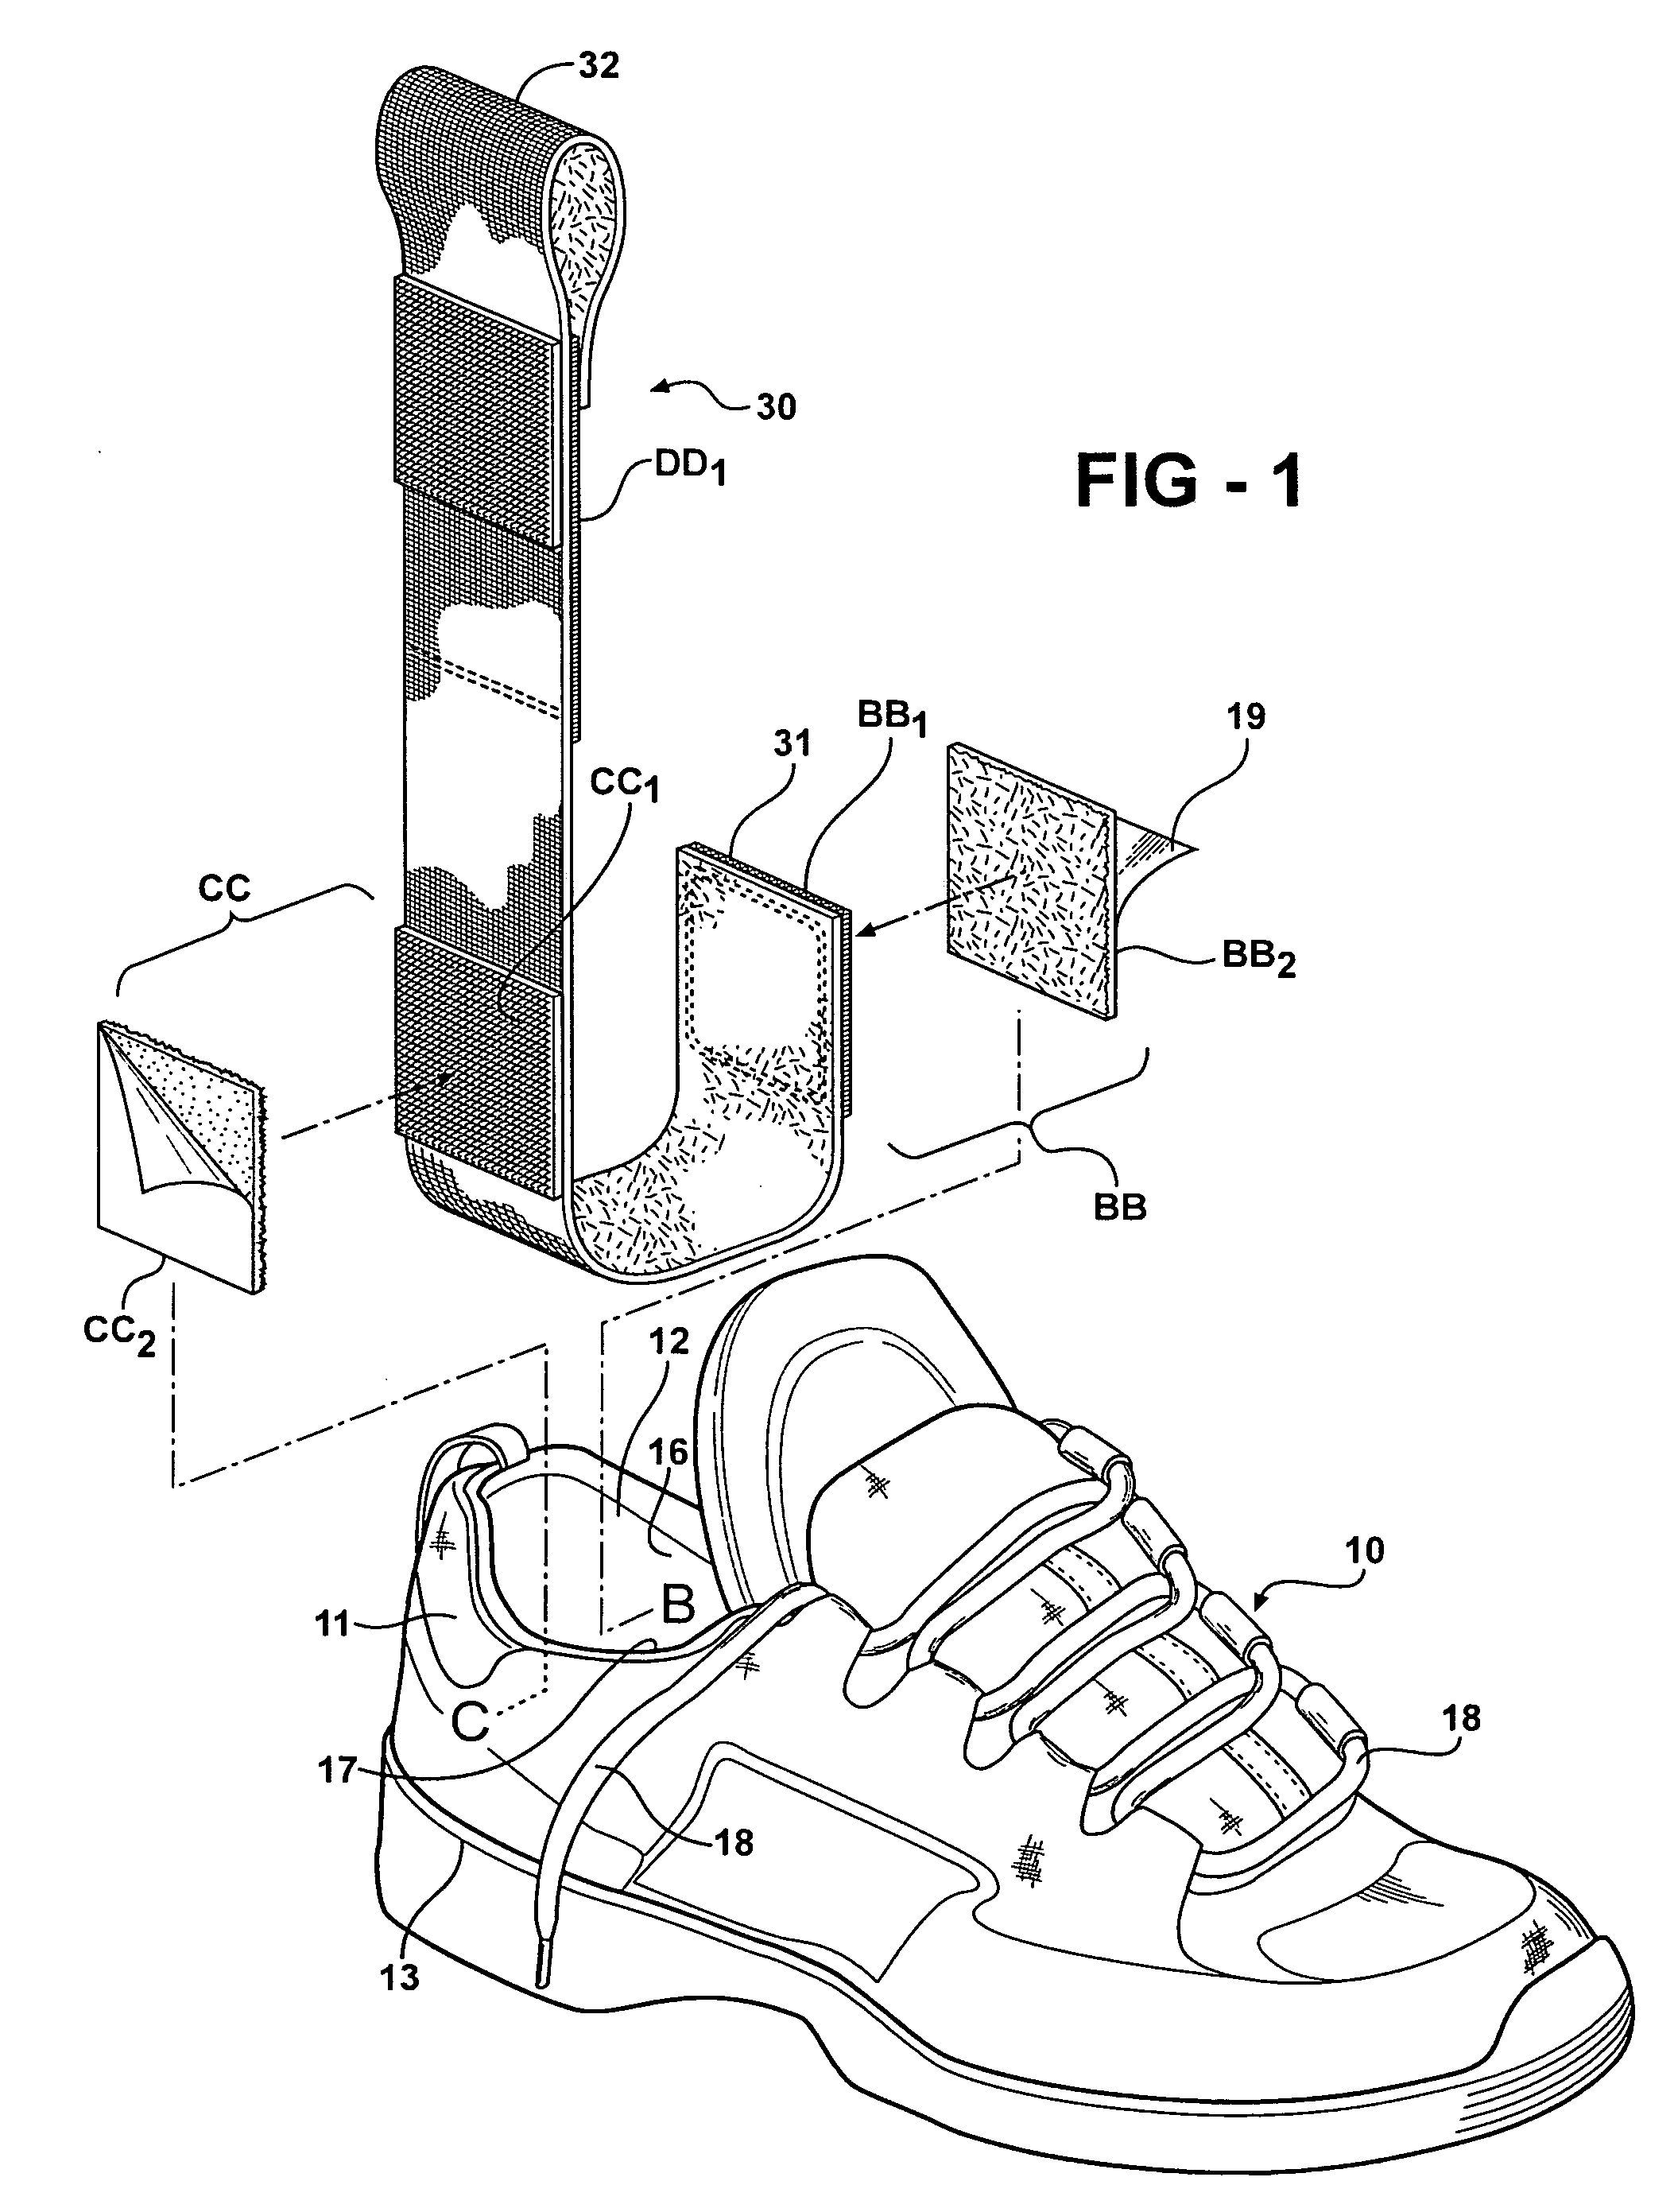 Device and method for combining an athletic shoe and conventional ankle brace to limit active ankle inversion